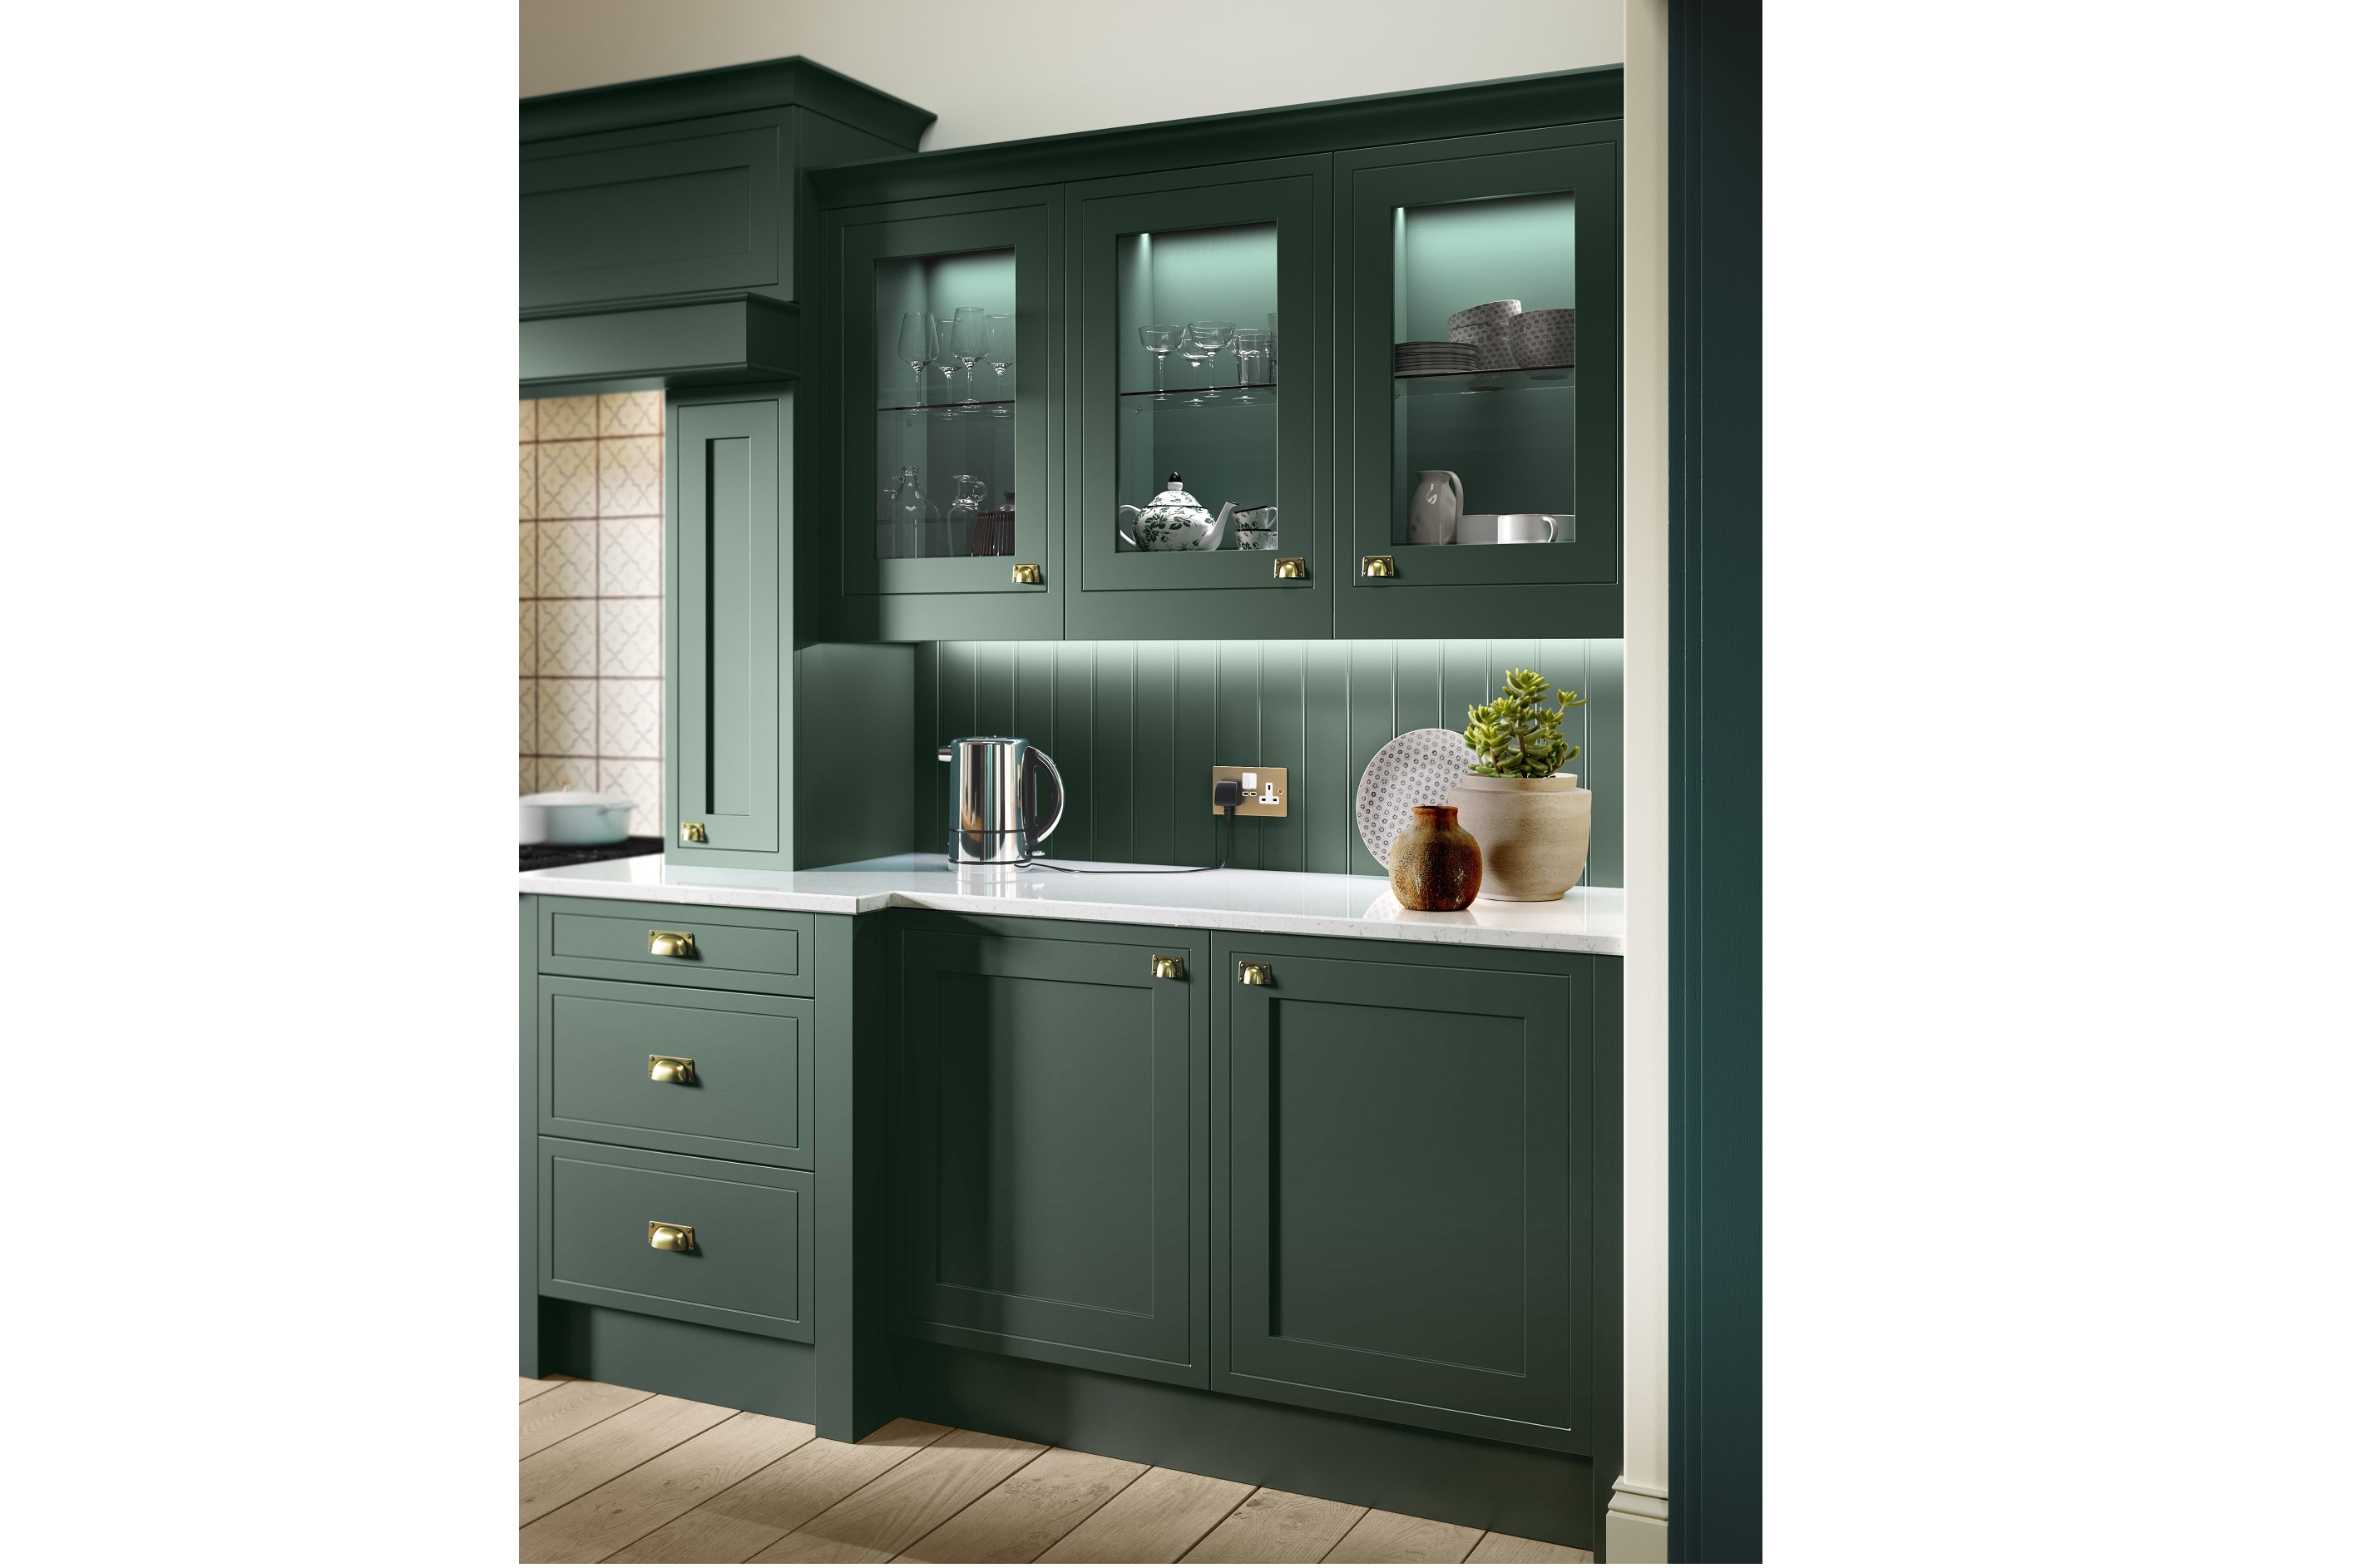 Mock In-Frame Shaker-Style Kitchen Painted Heritage Green featuring shaker doors with glazed panels and Silestone quartz worktop